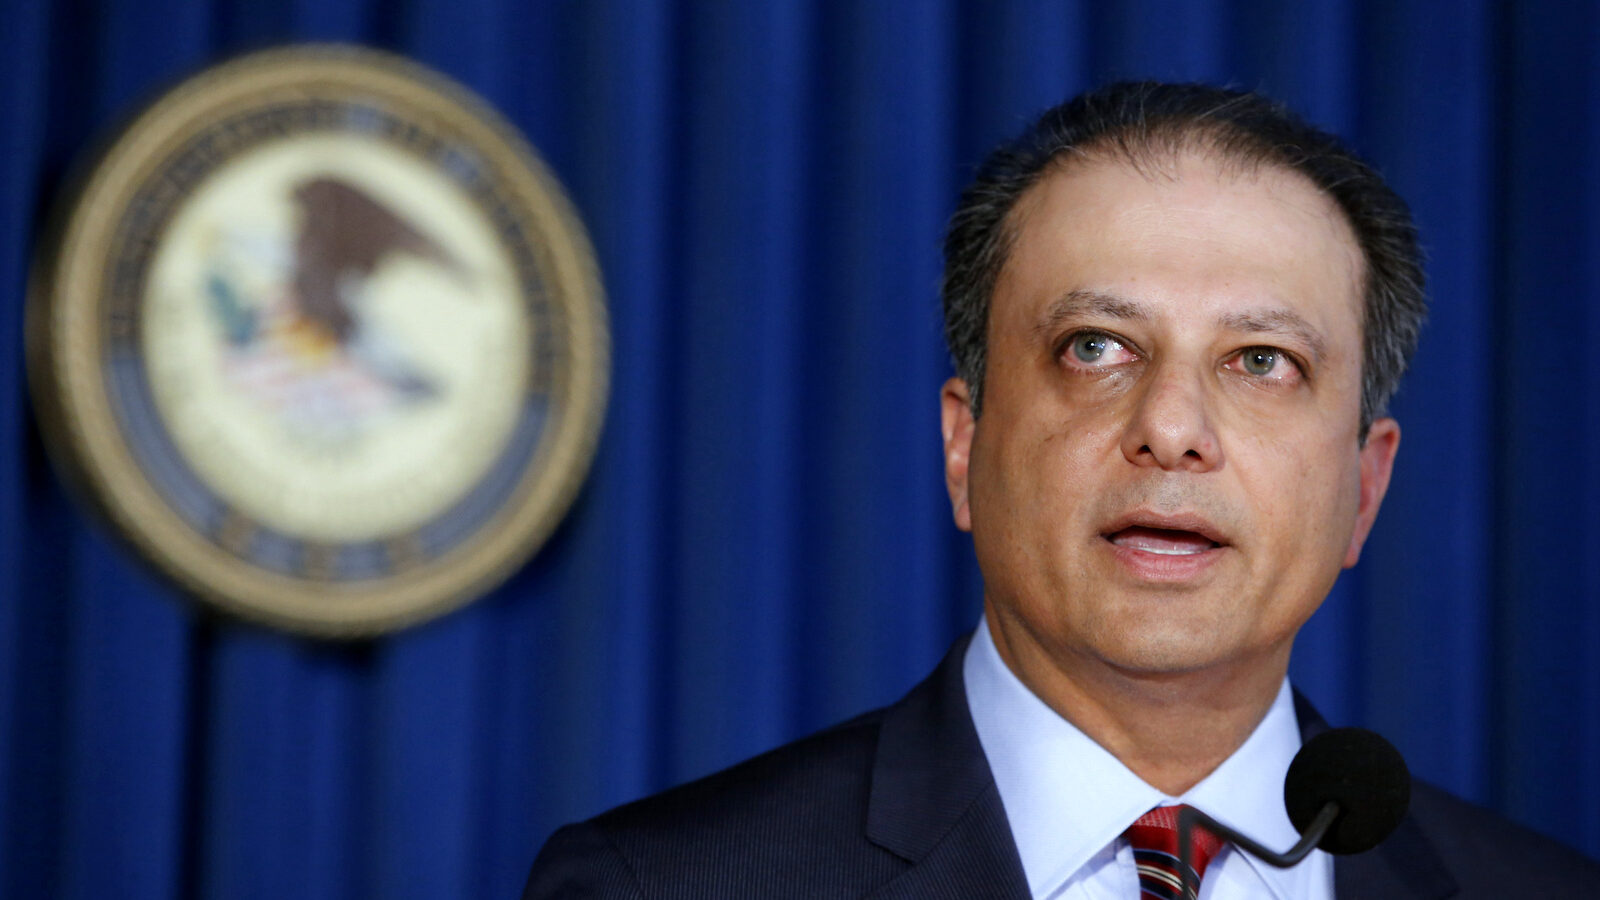 U.S. Attorney Preet Bharara speaks during a news conference in New York. On Wednesday, March 8, 2017, two days before Attorney General Jeff Sessions gave dozens of the country's top federal prosecutors just hours to resign and clean out their desks. Bharara said on Saturday, March 11, 2017, that he was fired after refusing to resign. (AP/Kathy Willens)